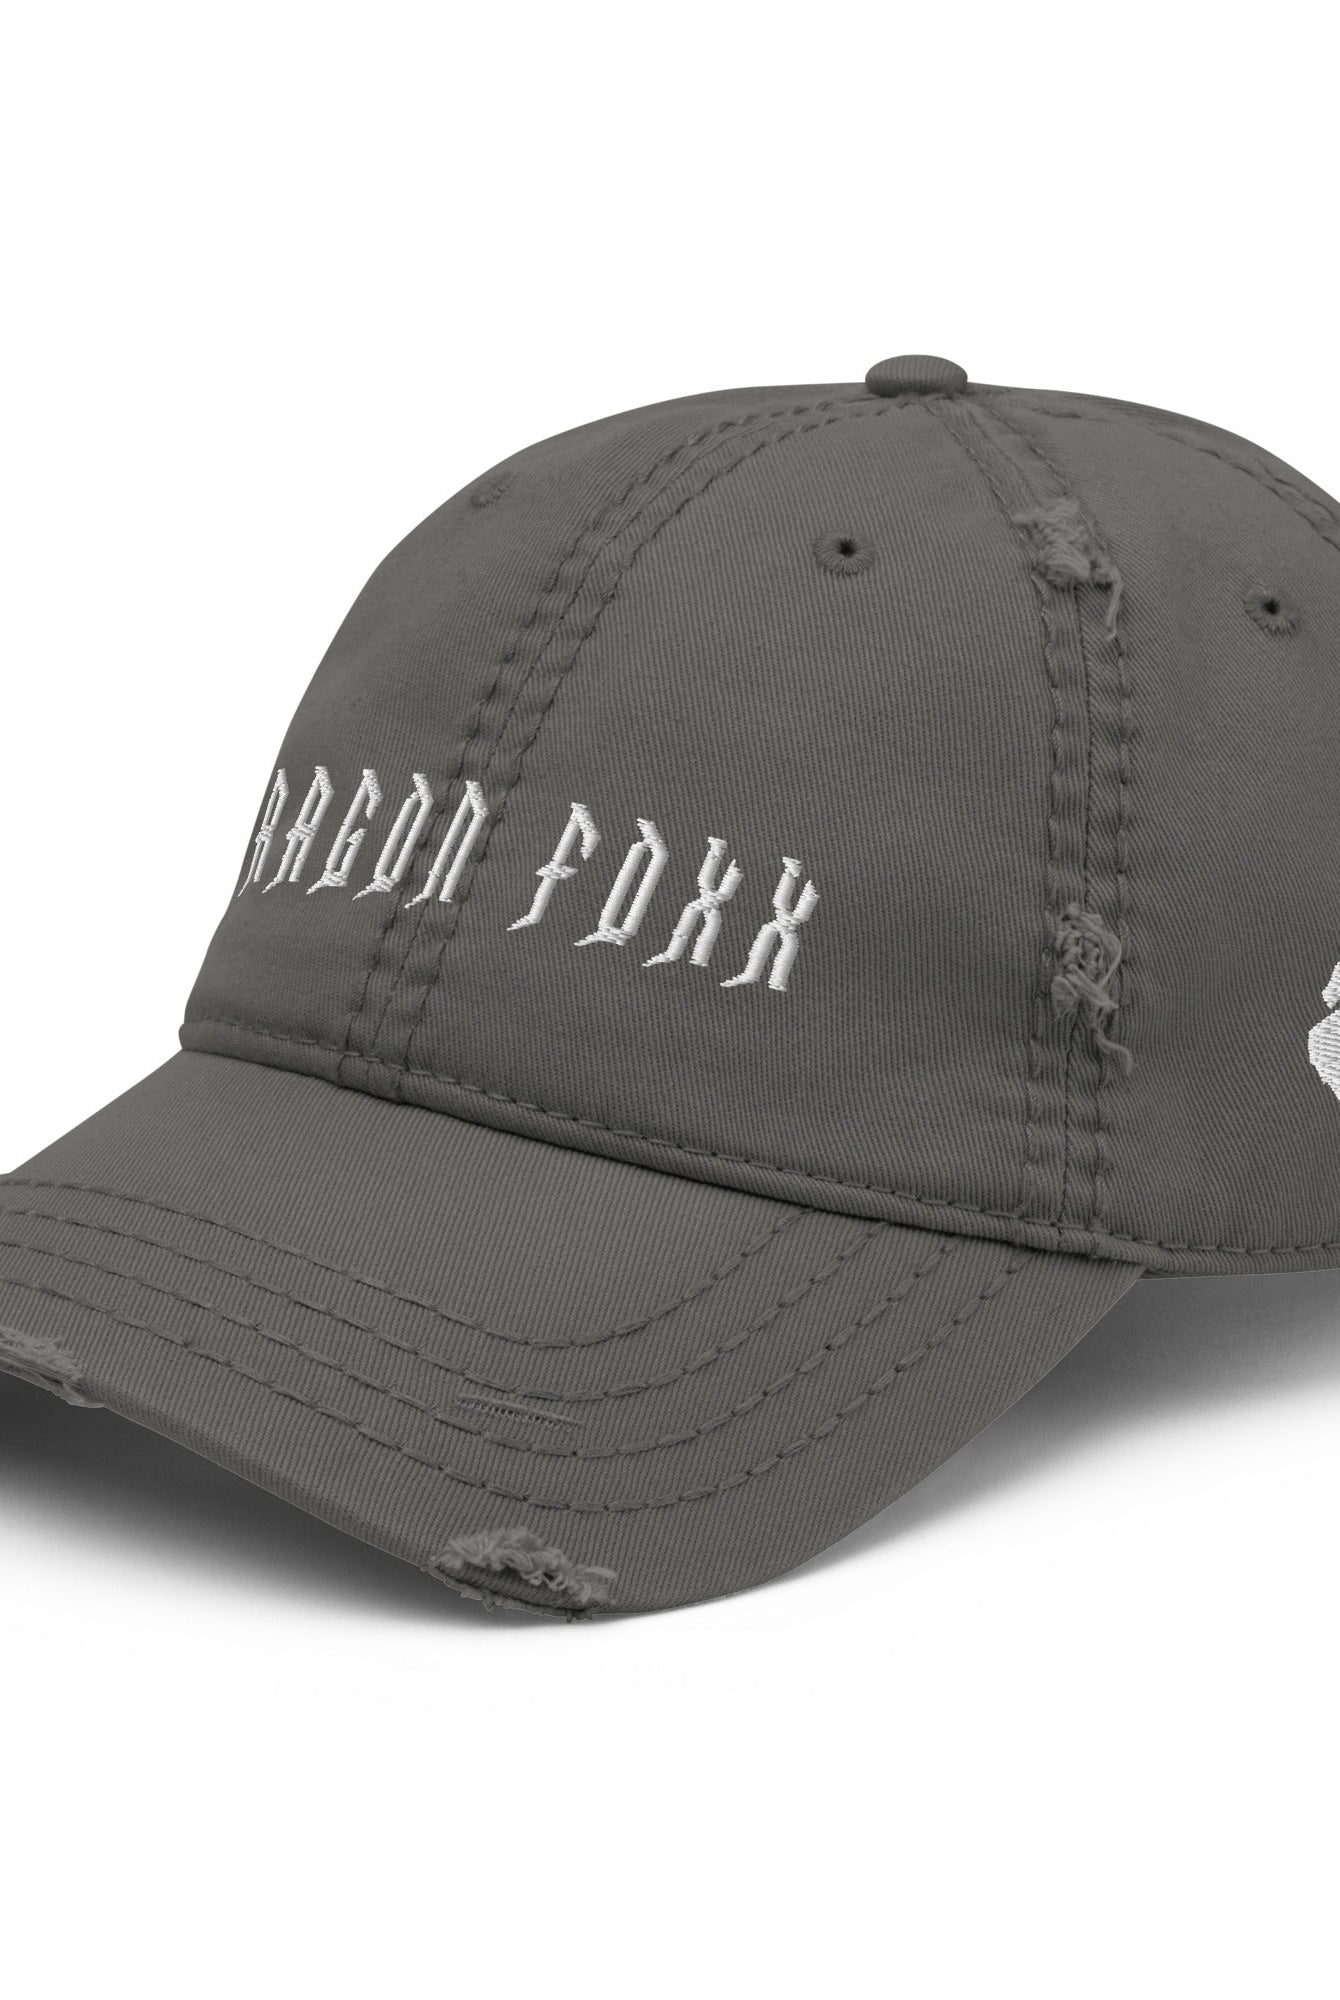 Distressed Dad Hats - White Embroidered - Distressed Dad Hat - DRAGON FOXX™ - Distressed Dad Hats - White Embroidered - 7823977_10992 - Charcoal Grey - Distressed - One size - Accessories - Black Distressed Hat - Charcoal Grey Distressed Hat